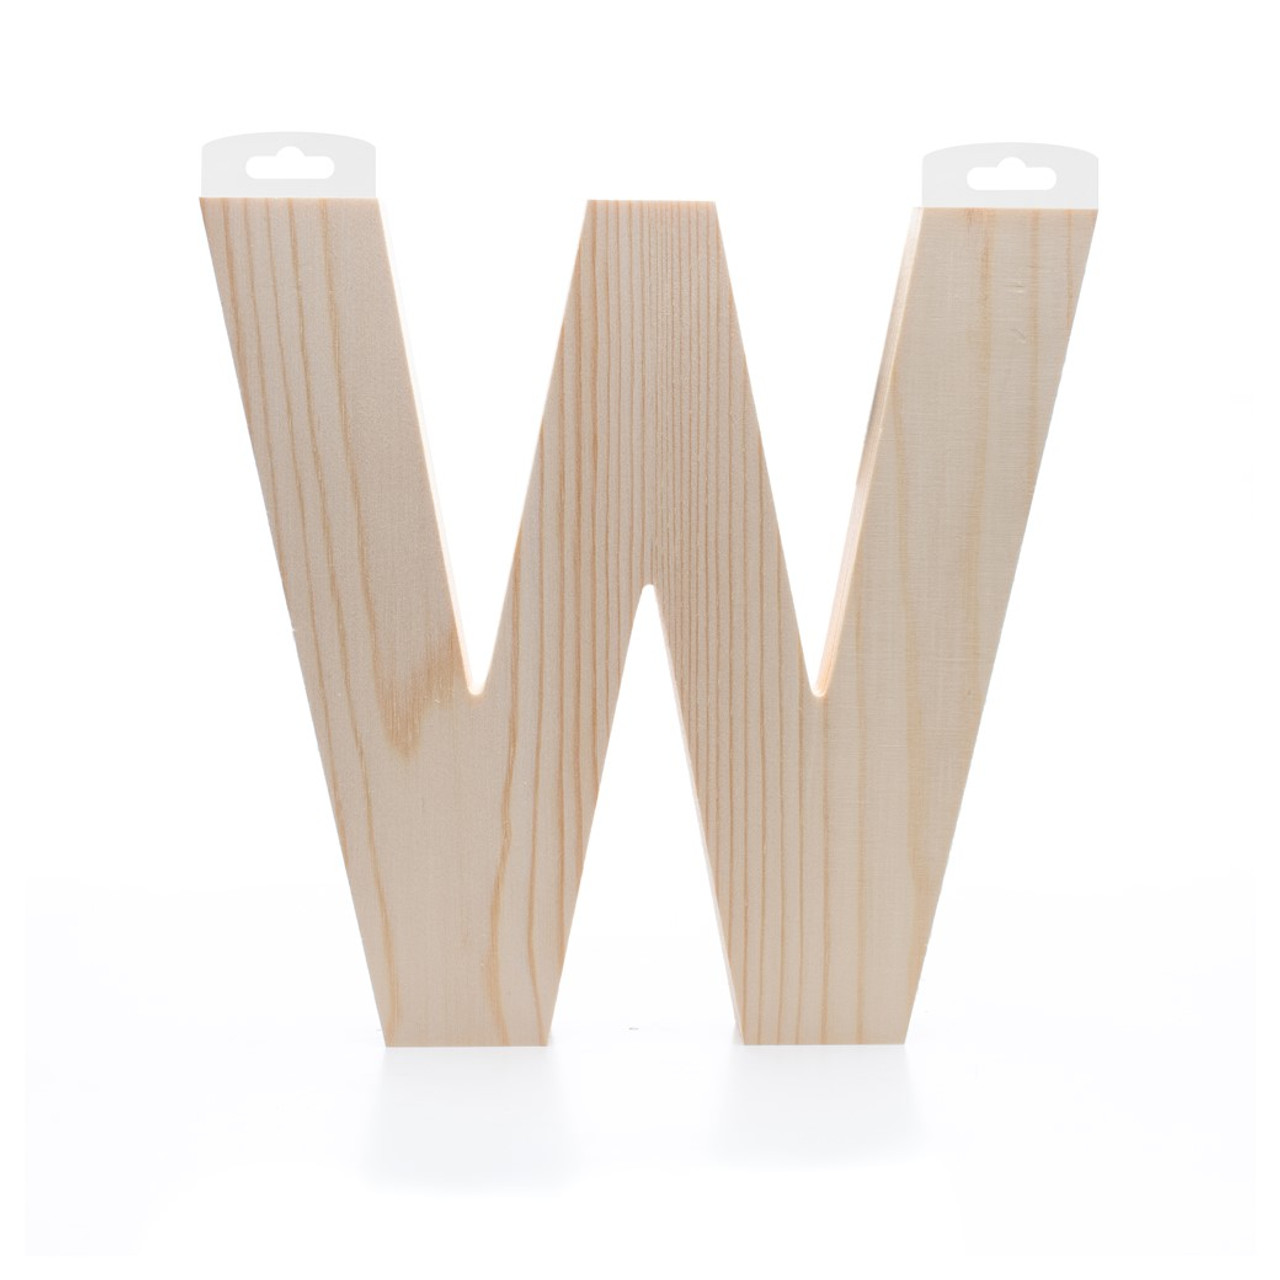 Pack of 1, 3 Inch x 1/4 Inch V Round Font Wood Letters for Wood Craft  Project, Children or Adult Art Work, Home and Holiday Décor and DIY Fun,  Made in USA 